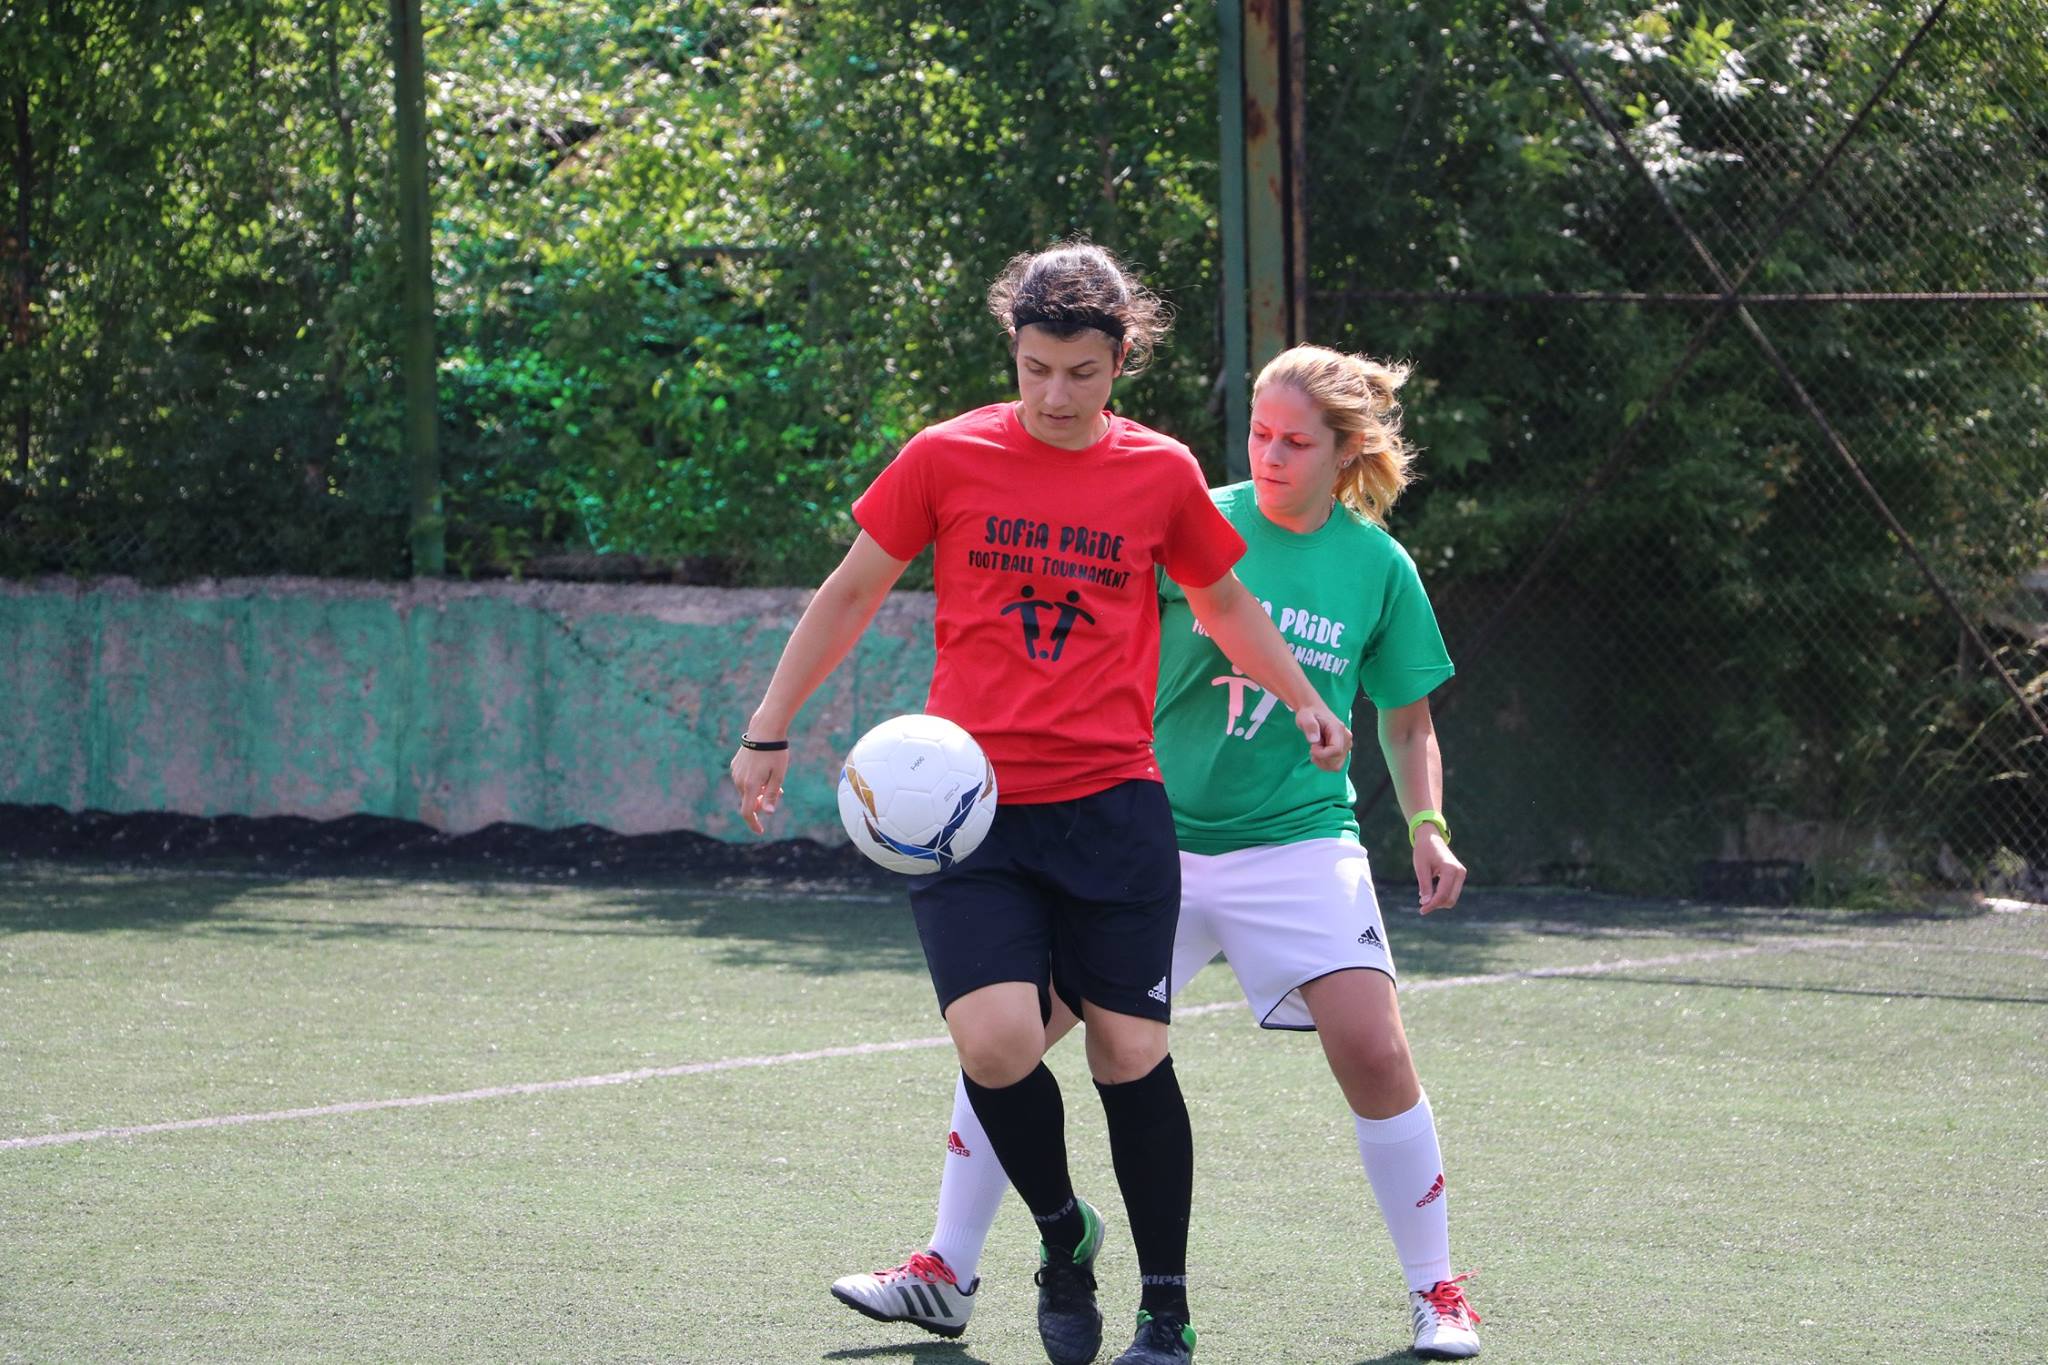 Sofia Pride Sports – Support from Football Radar for the soccer tournament